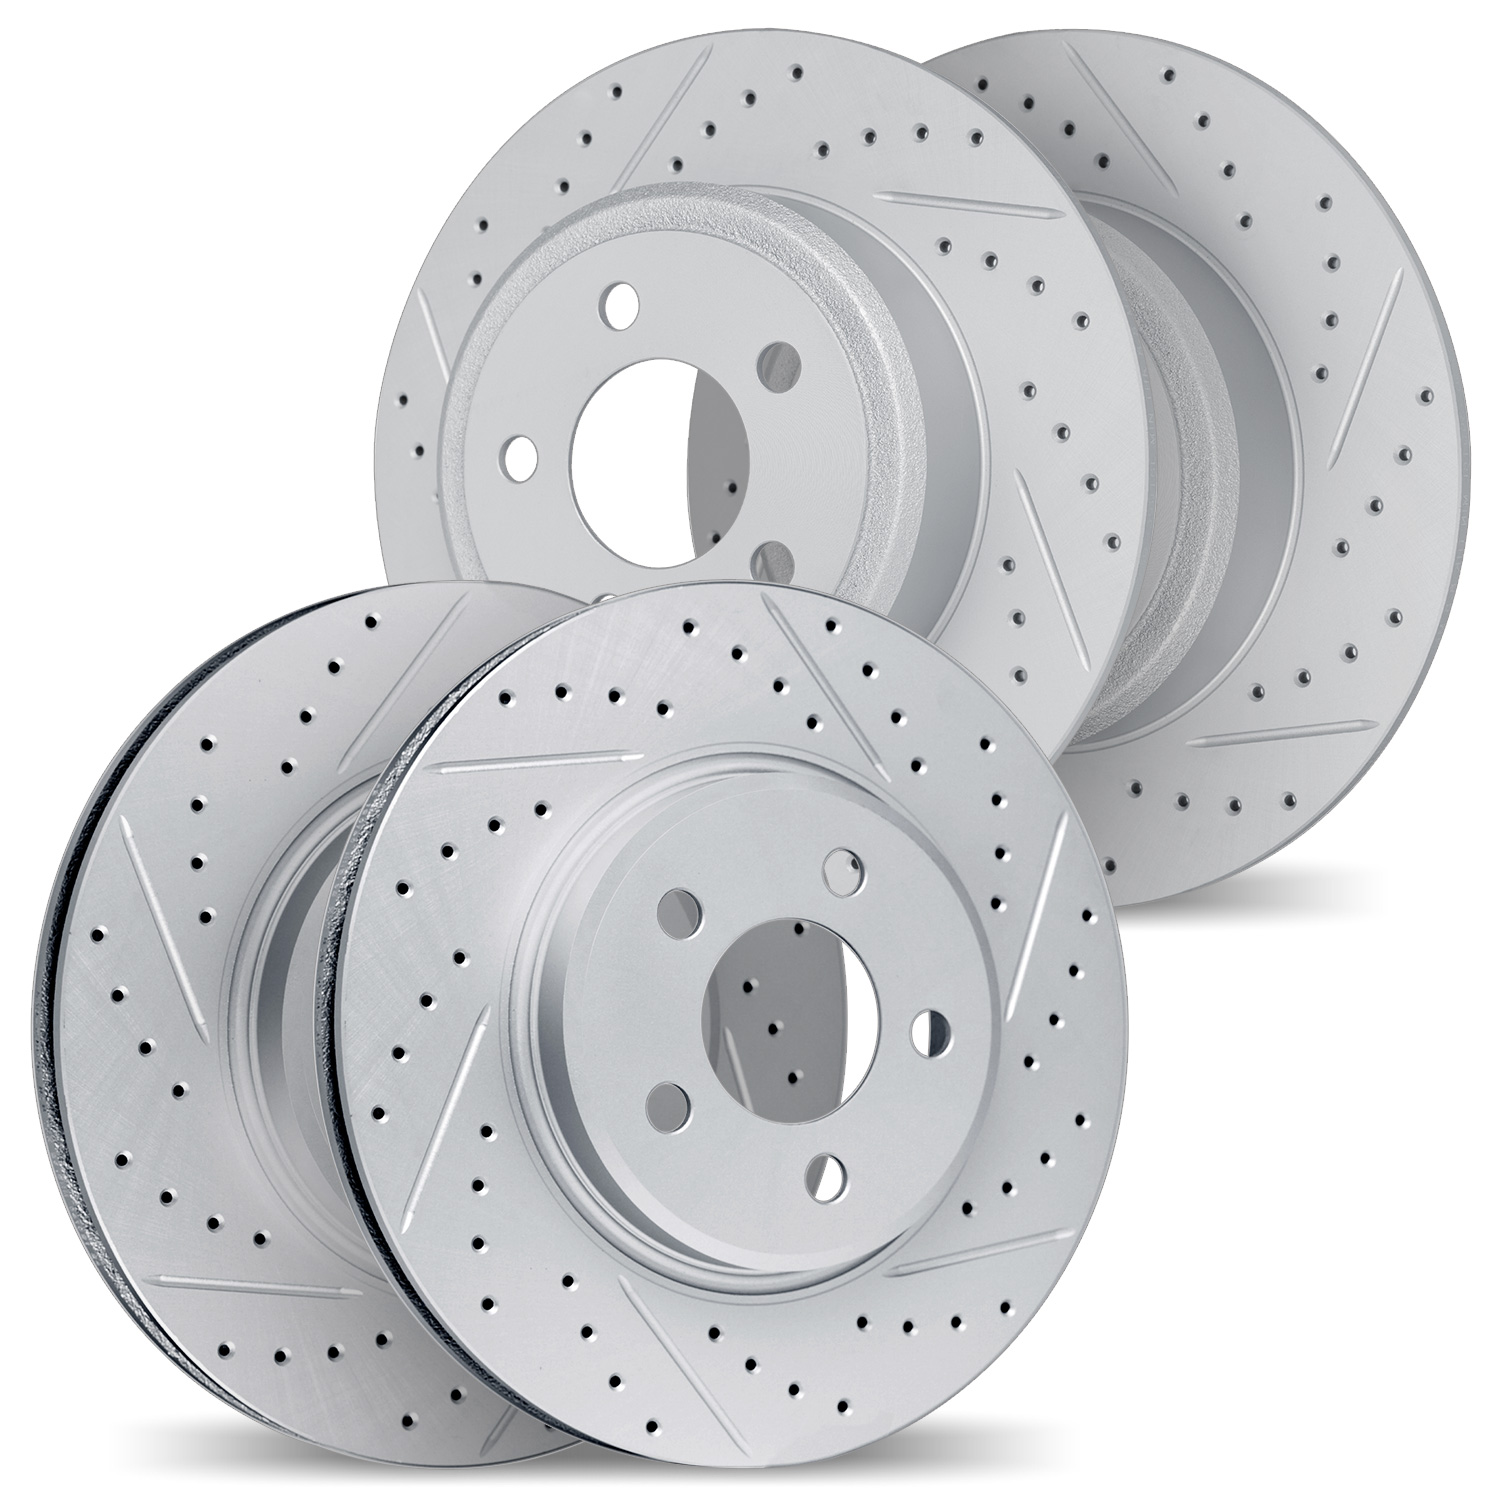 2004-73002 Geoperformance Drilled/Slotted Brake Rotors, 2000-2008 Audi/Volkswagen, Position: Front and Rear